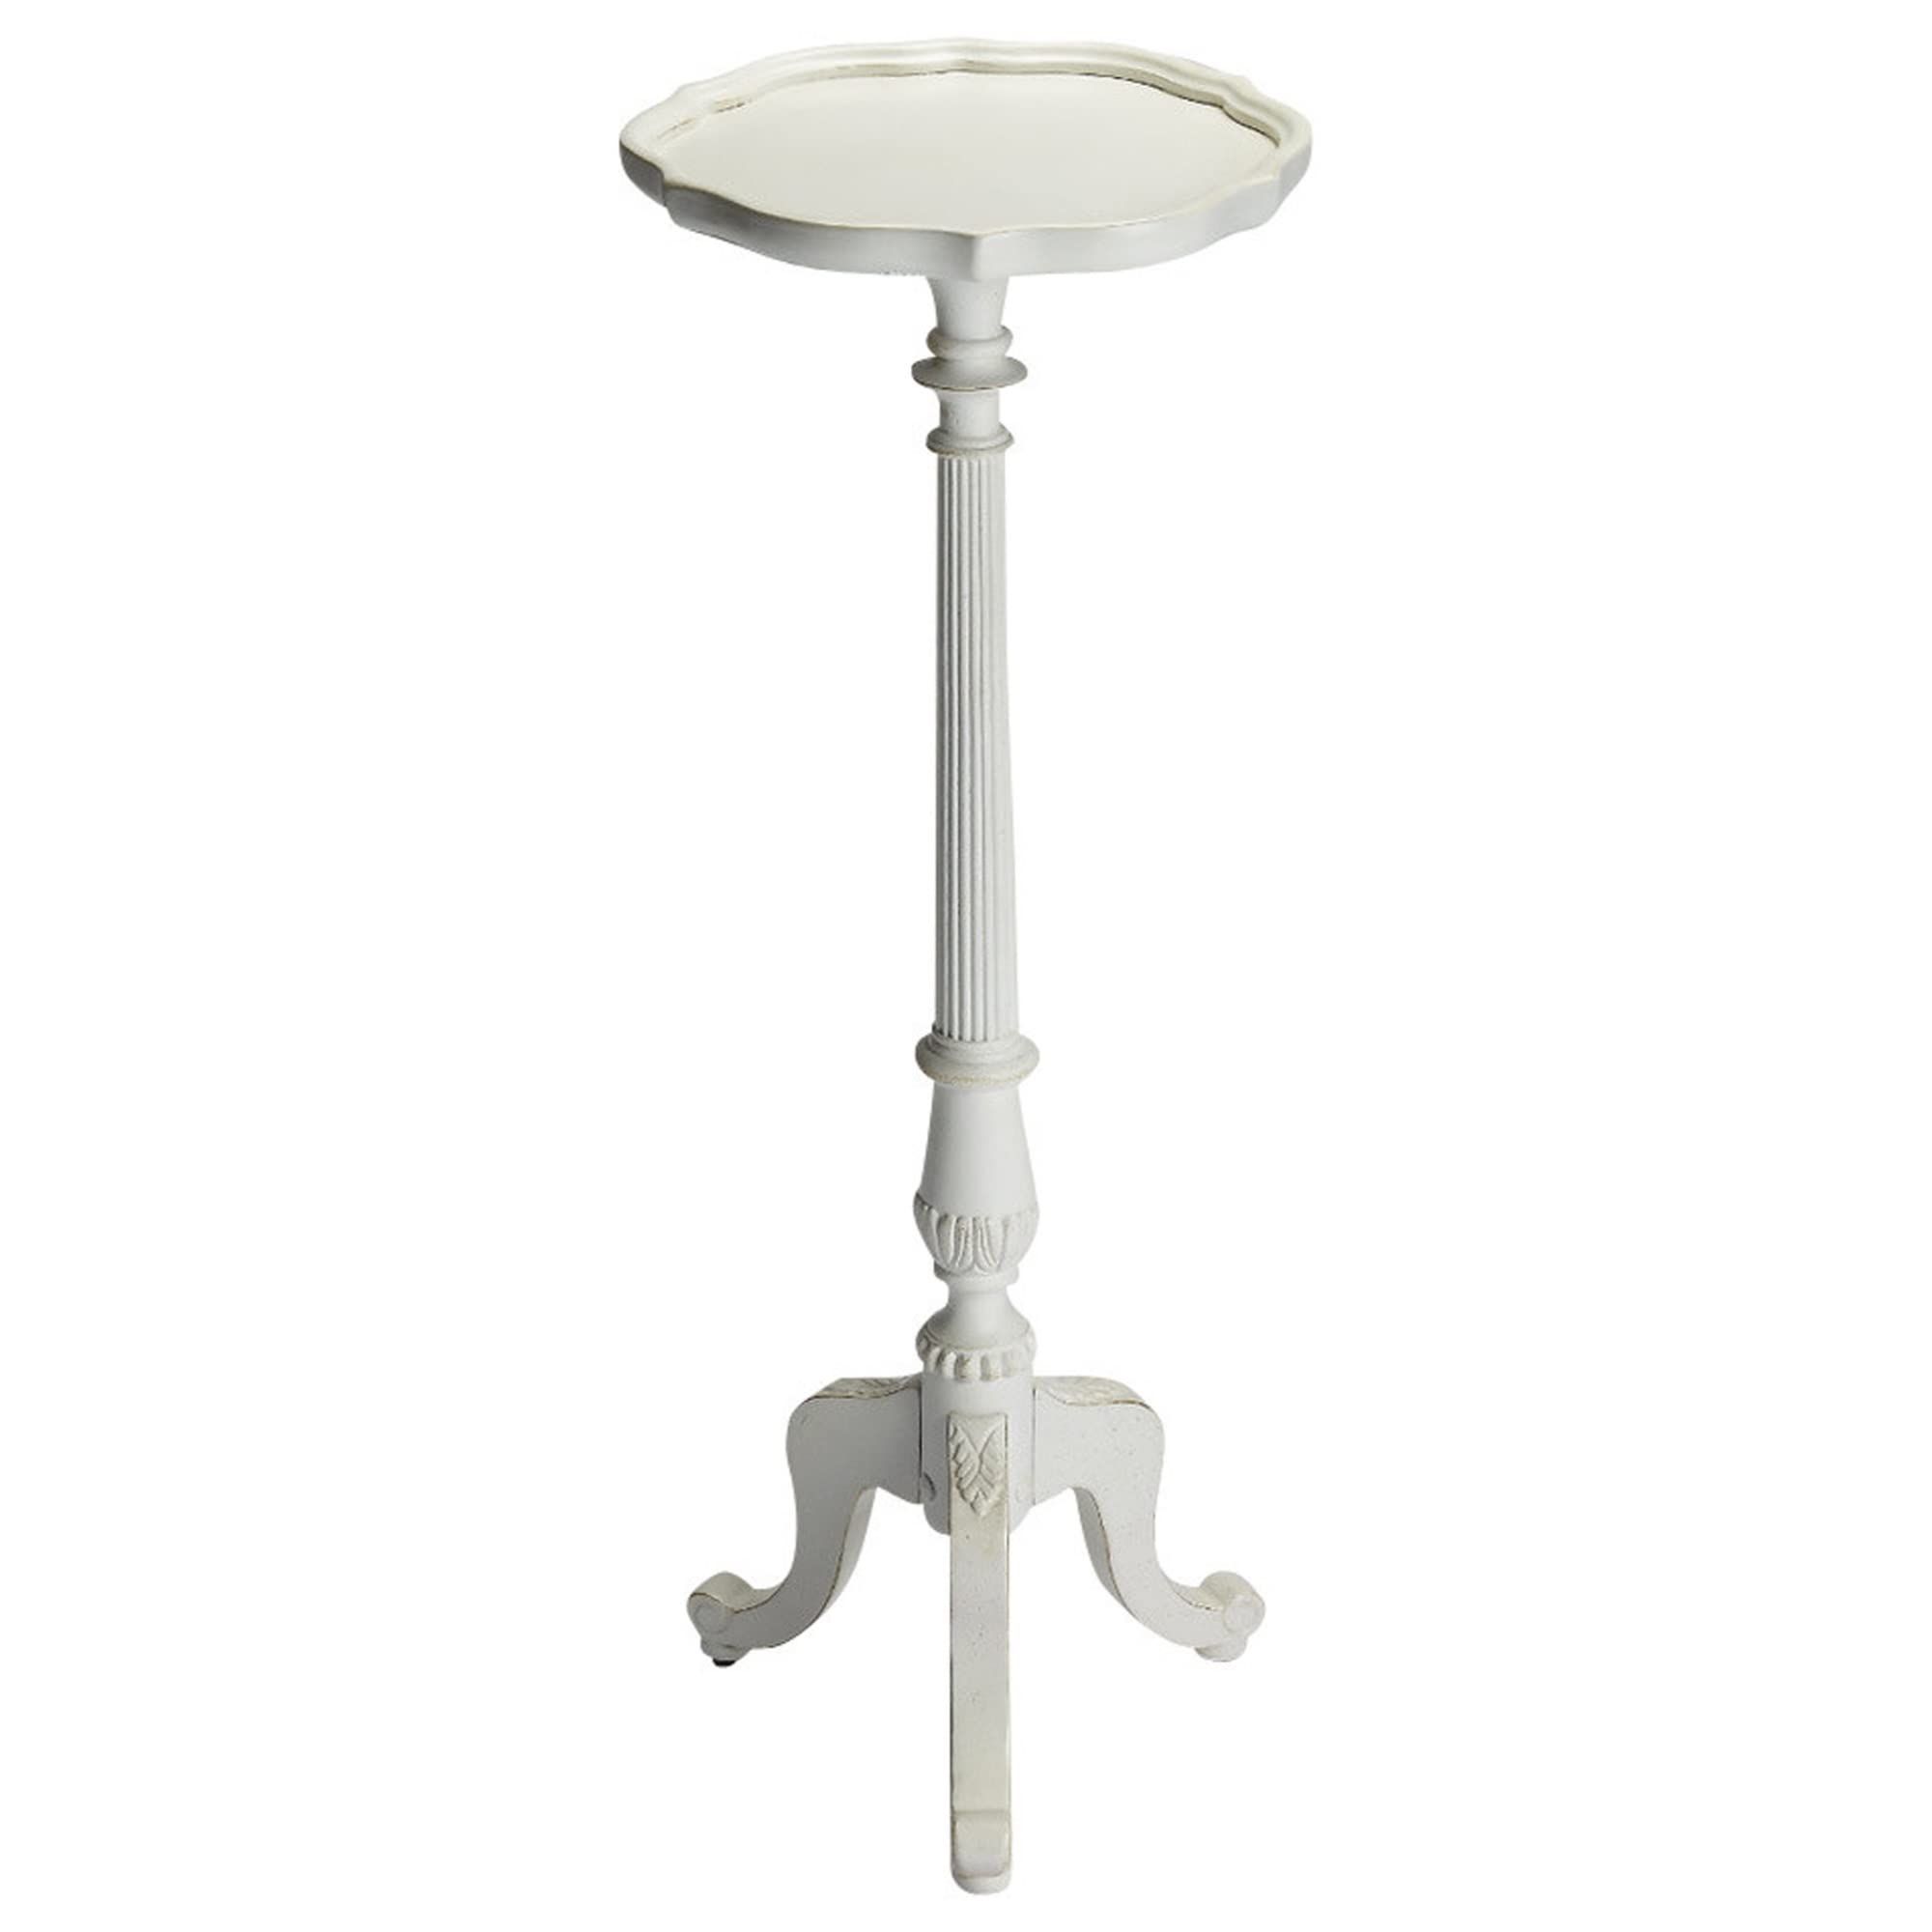 Amazon: Woybr Pedestal Plant Stand : Patio, Lawn & Garden Intended For Famous Pedestal Plant Stands (View 5 of 10)